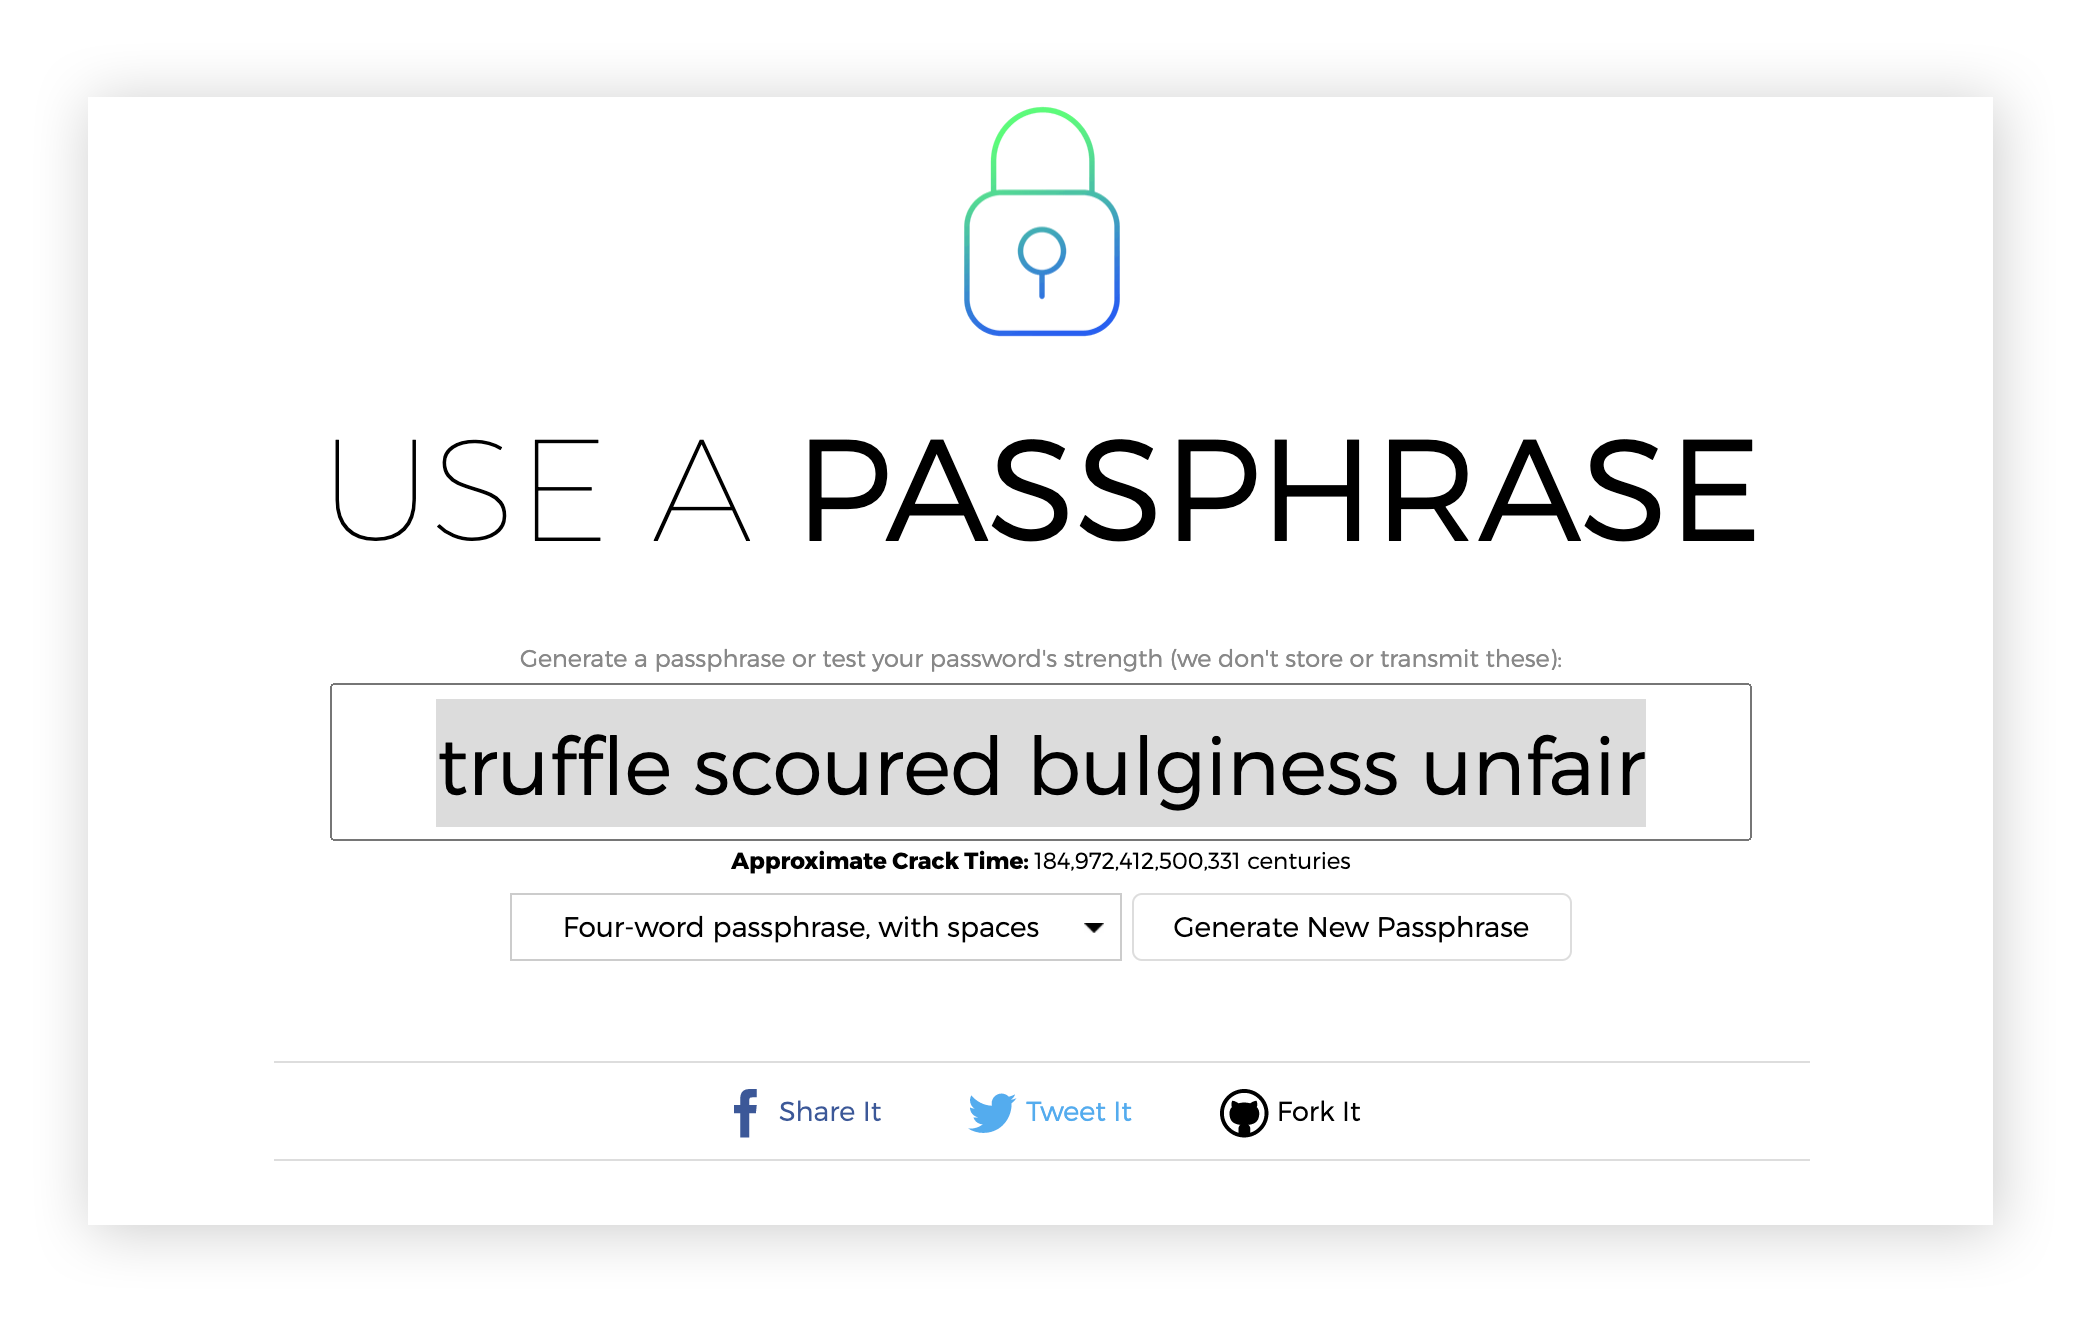 Creating a passphrase with the Use A Passphrase website.